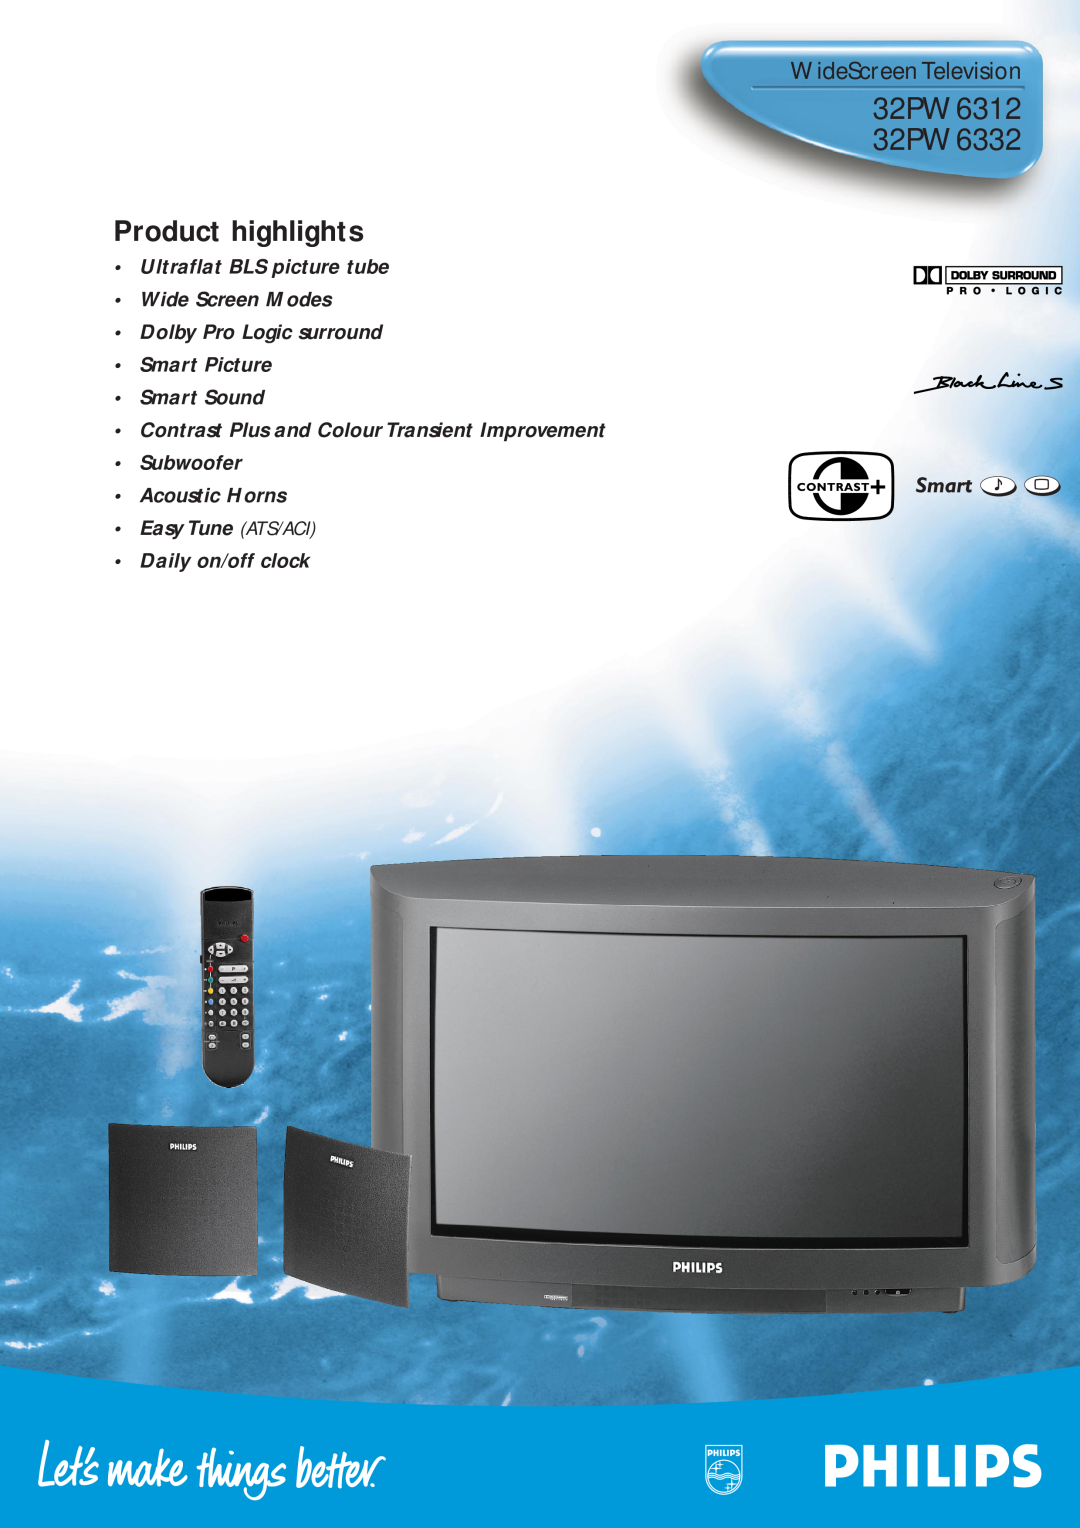 Philips 32PW6312 32PW6332, Product highlights, WideScreen Television, Ultraflat BLS picture tube Wide Screen Modes 